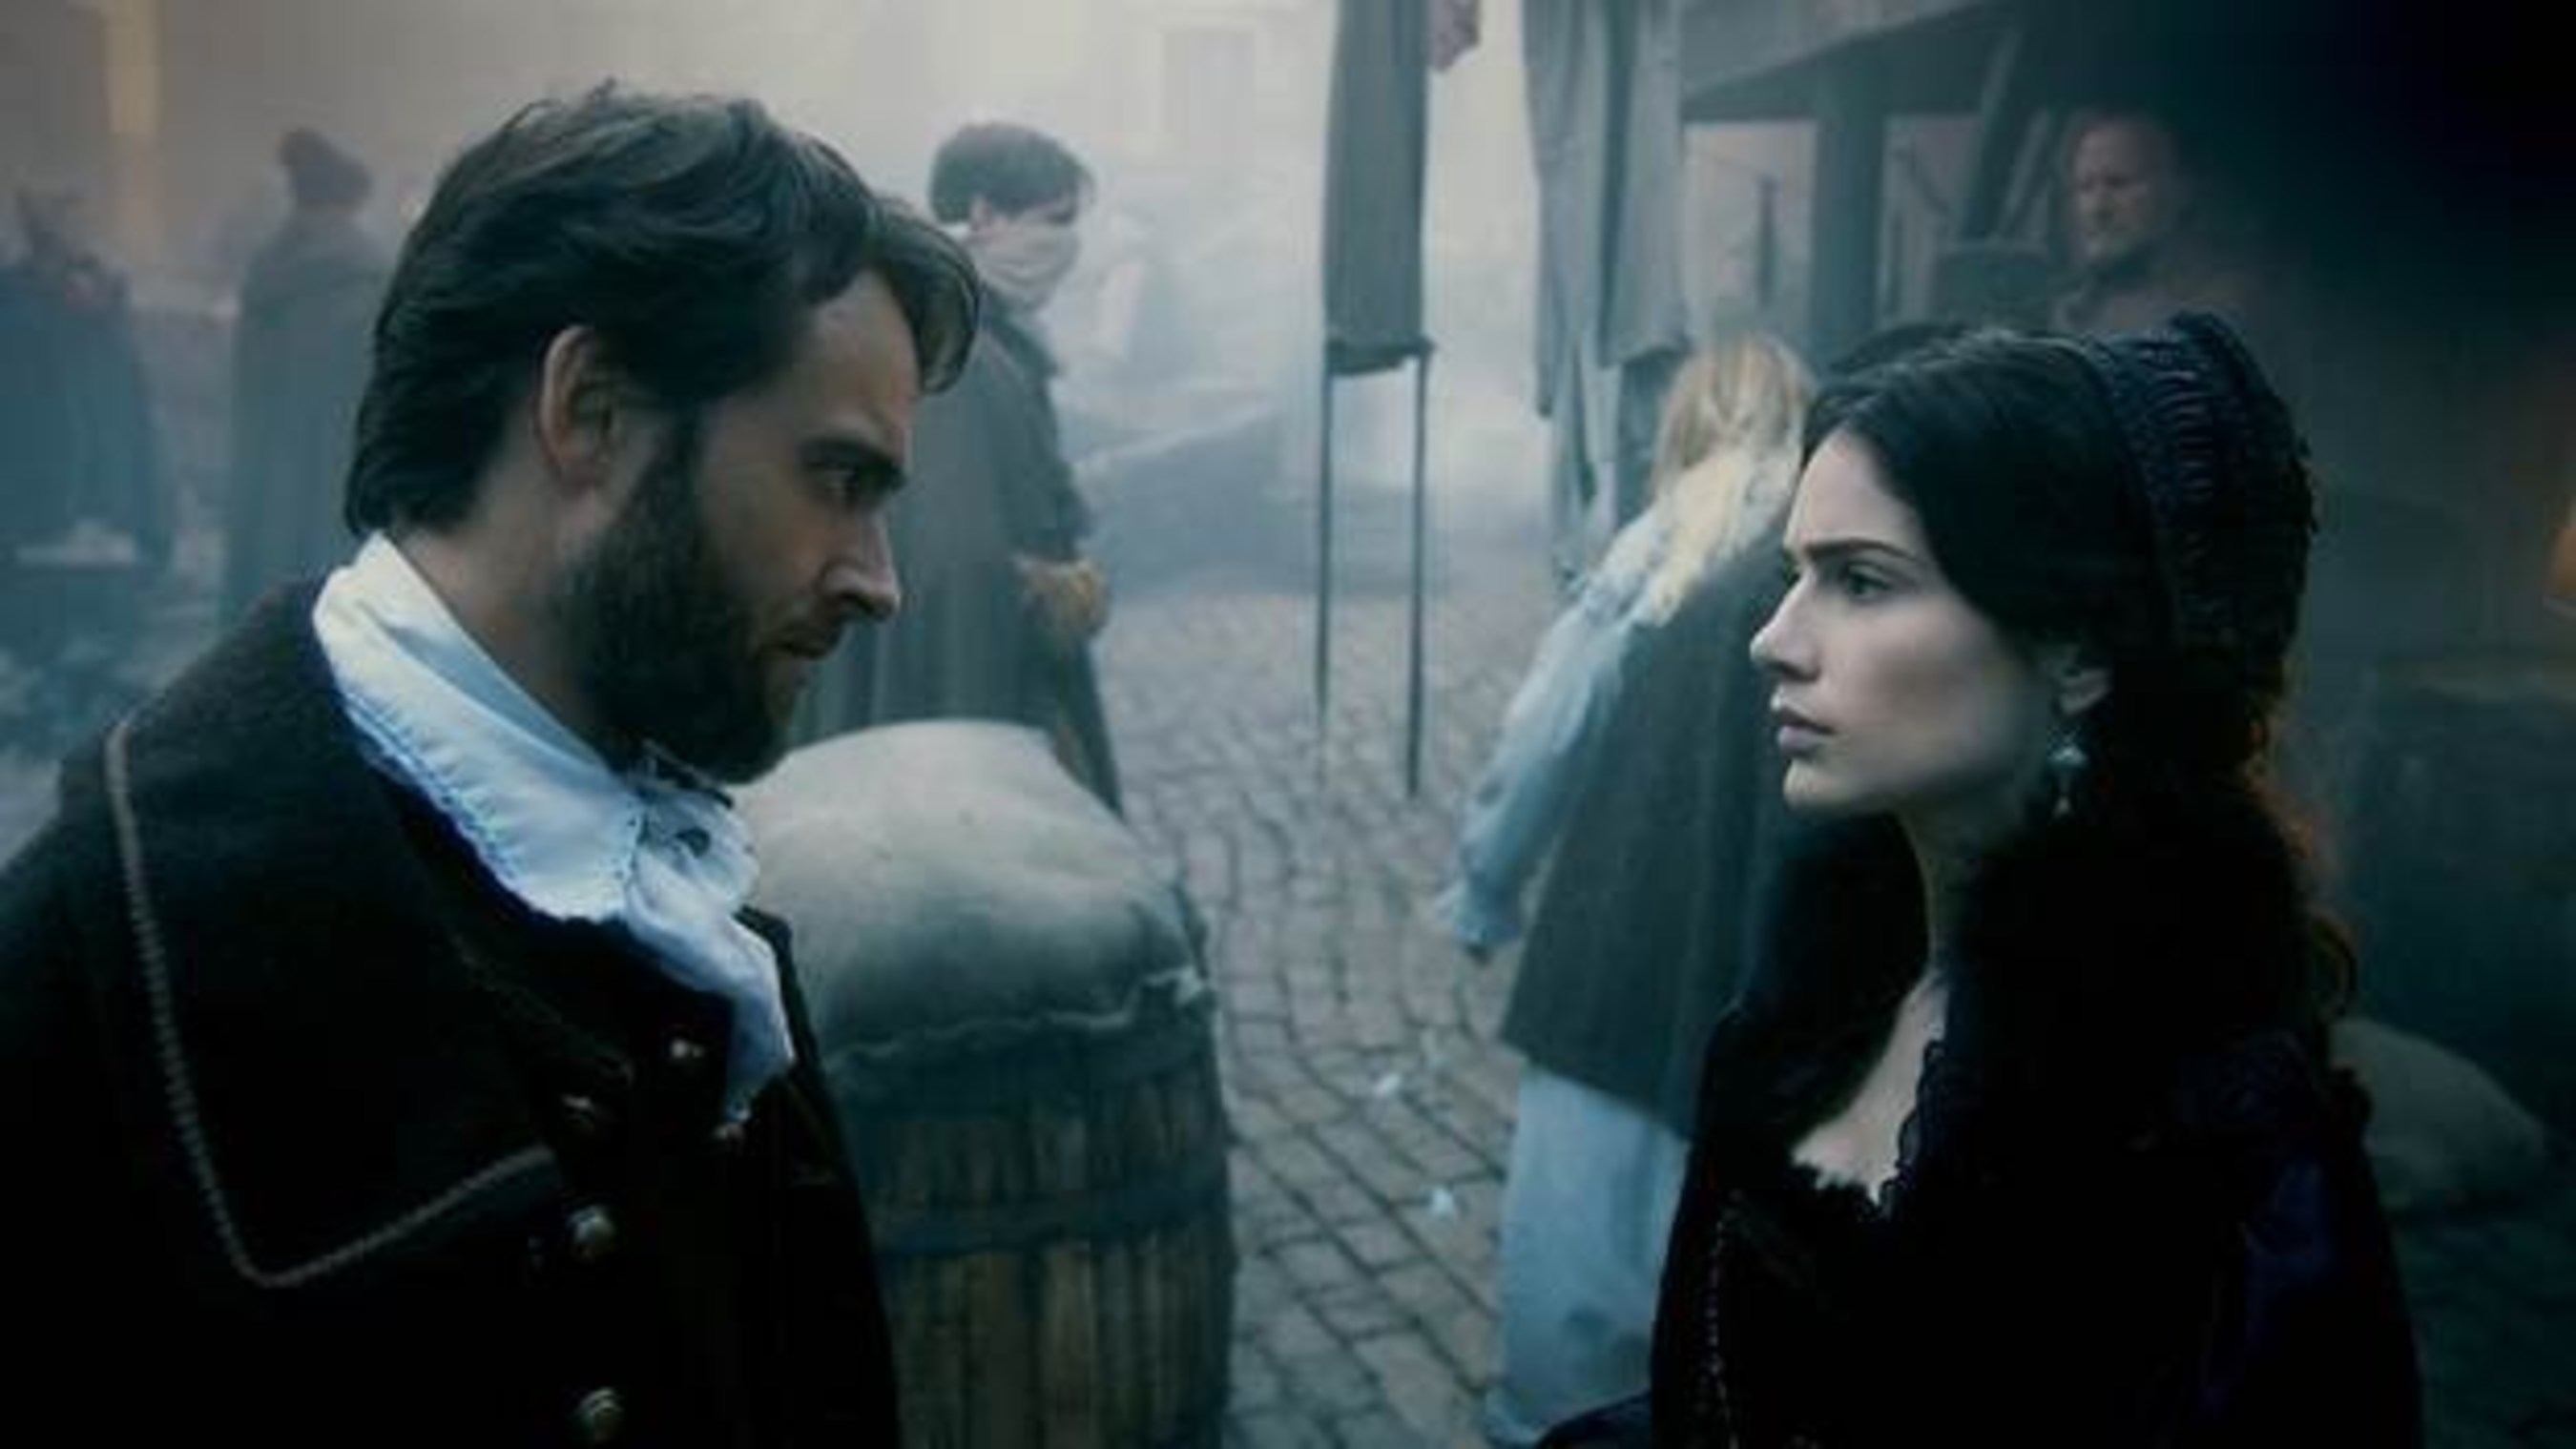 (L-R) Stuart Townsend as Samuel Wainwright and Janet Montgomery as Mary Sibley in the first look from WGN America's SALEM Season 2, premiering Sunday, April 5 at 10pm ET / 9pm CT.